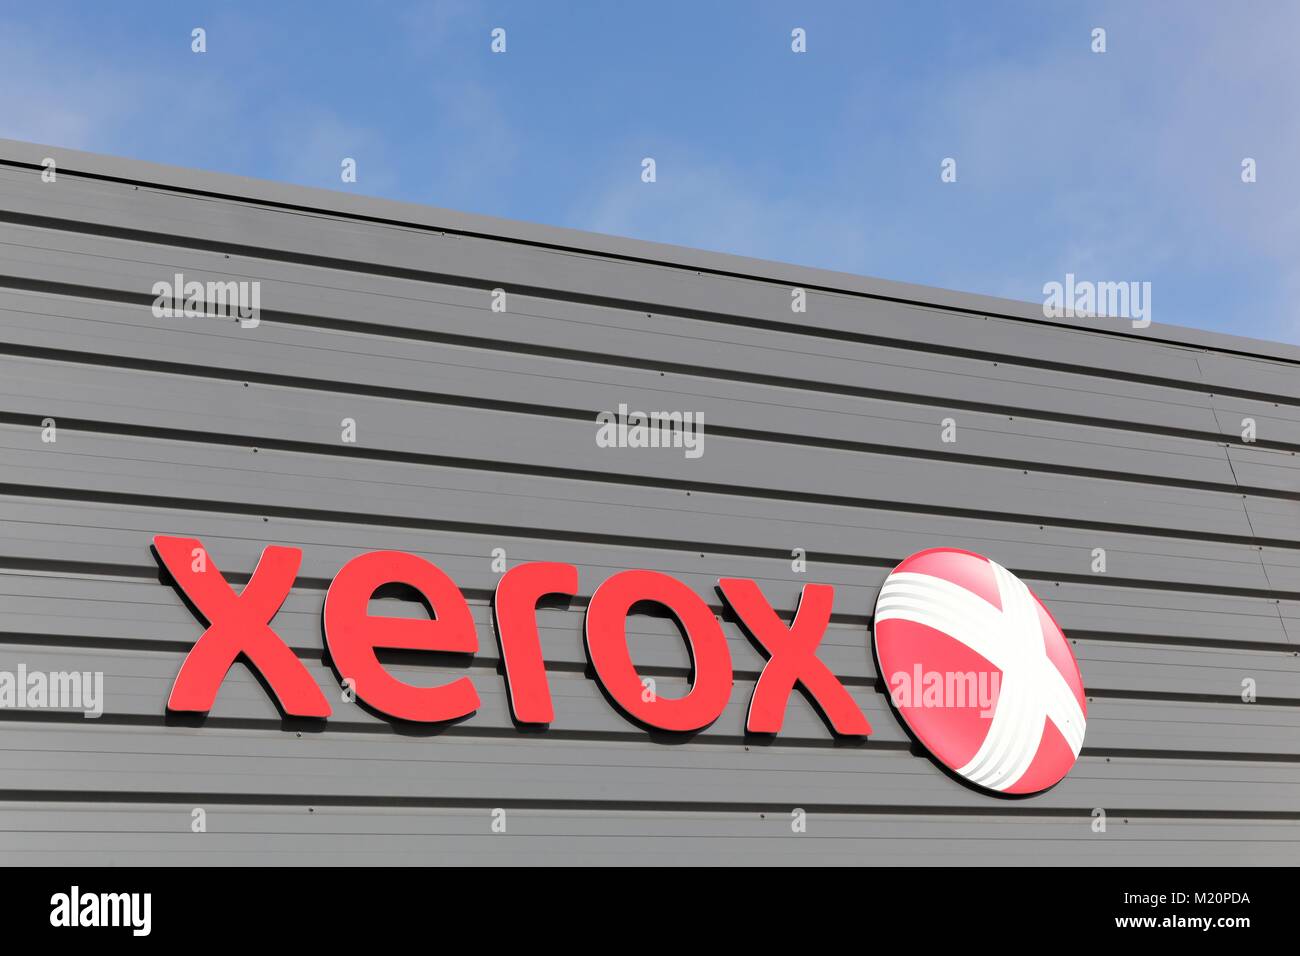 Dax, France - June 5, 2017:Xerox sign on a wall. Xerox is an American global corporation that sells business services and document technology products Stock Photo